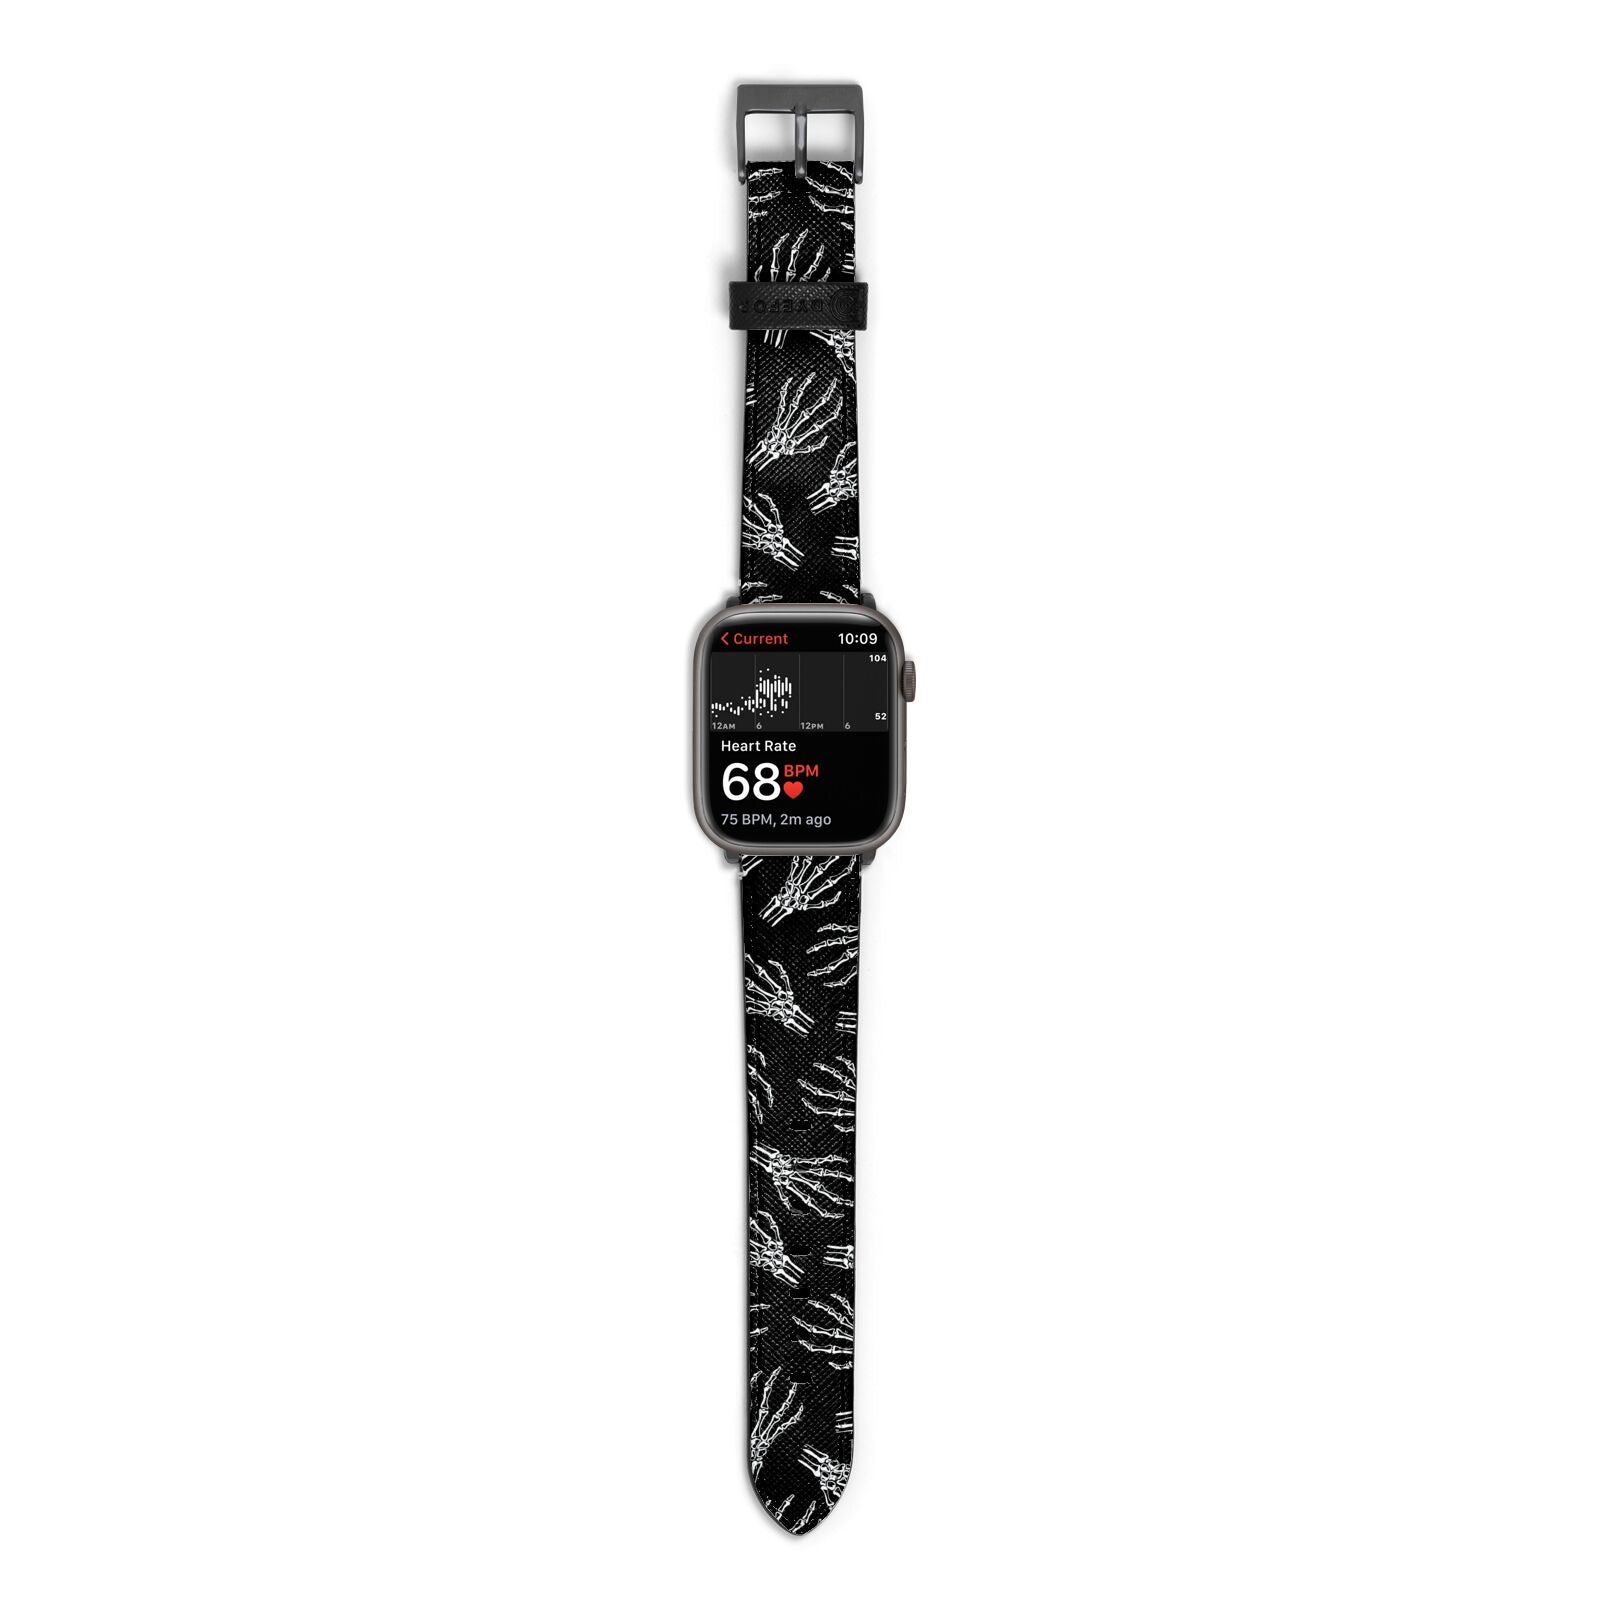 Skeleton Hands Apple Watch Strap Size 38mm with Space Grey Hardware